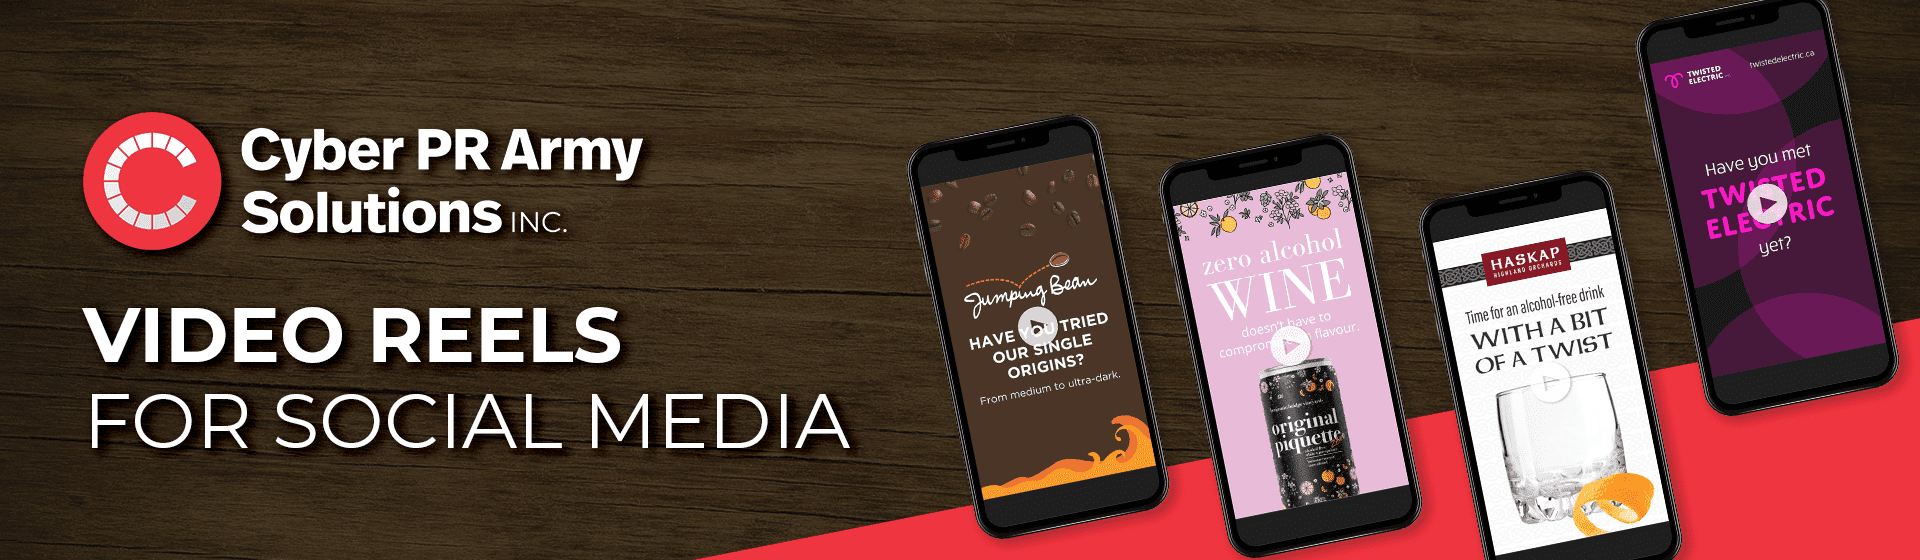 Header graphic with phone screens and text "Video Reels for Social Media"